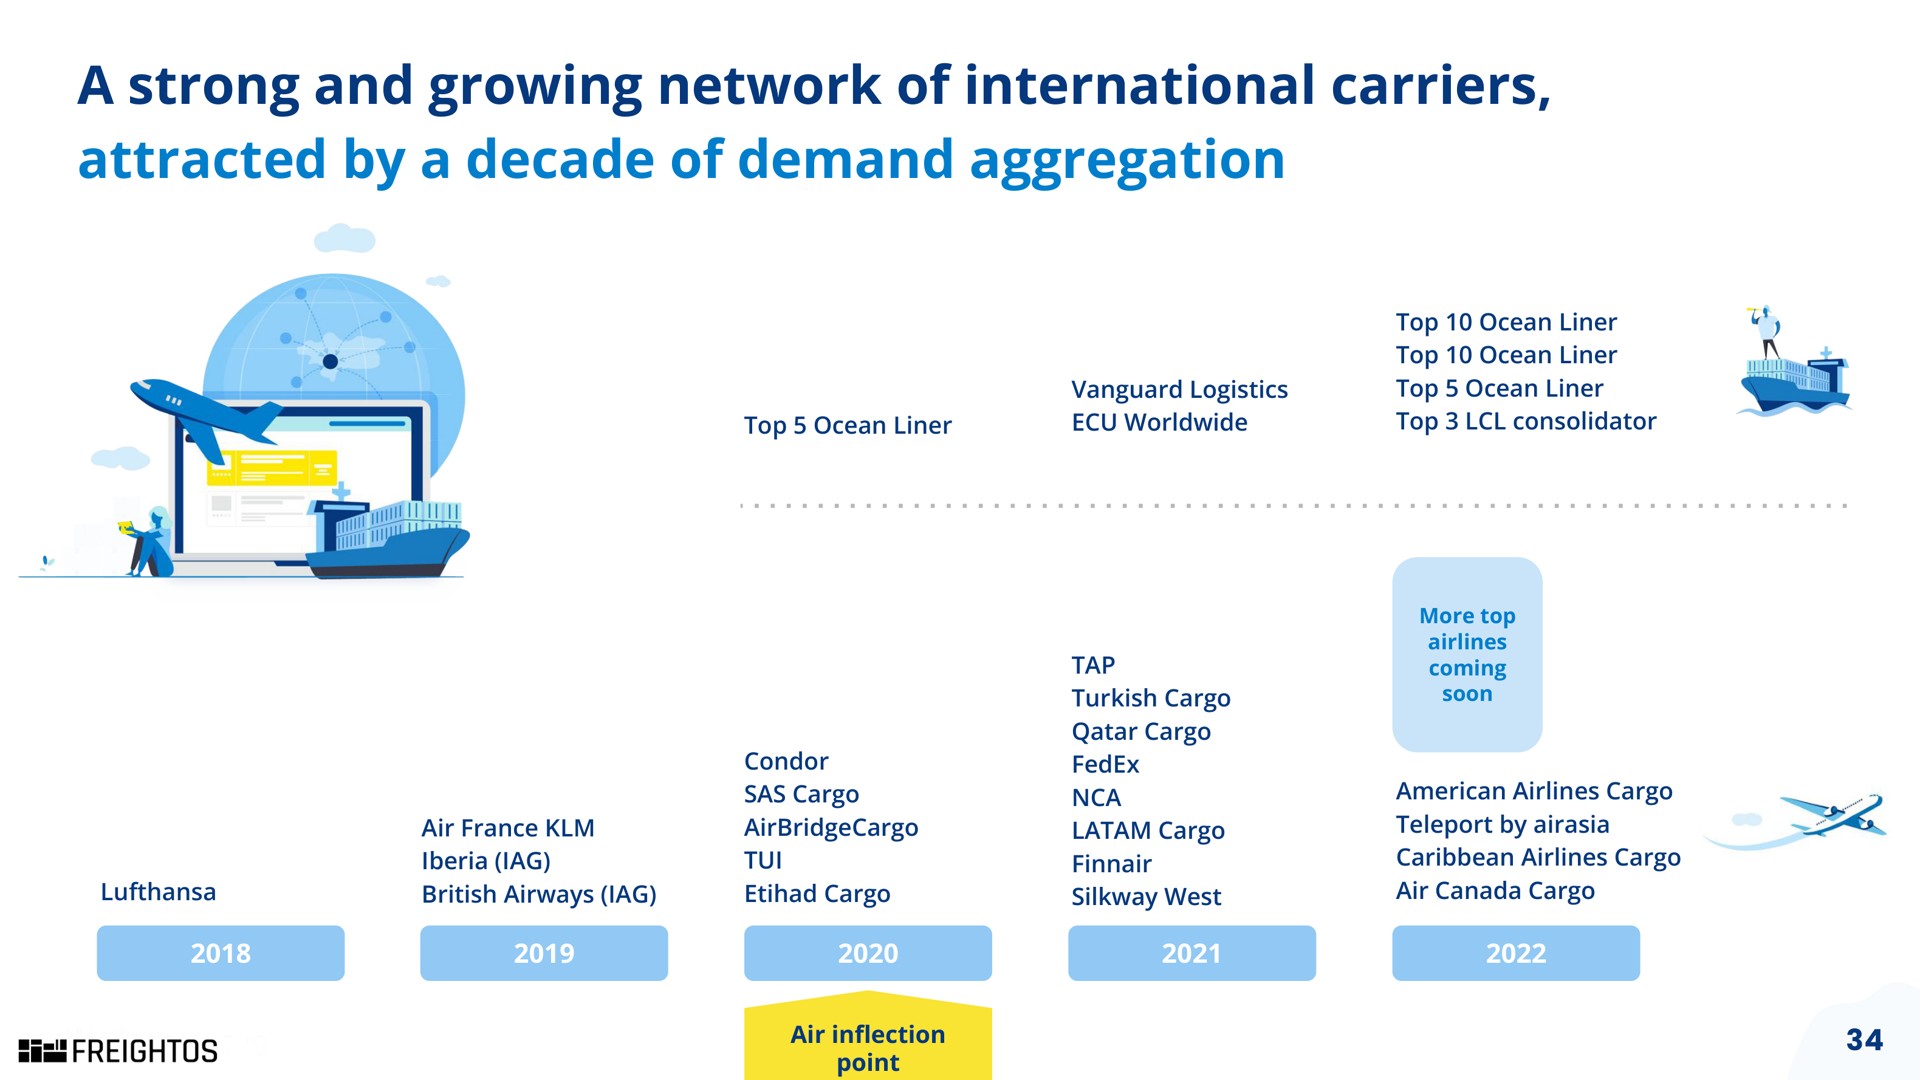 a strong and growing network of international carriers attracted by a decade of demand aggregation | Freightos